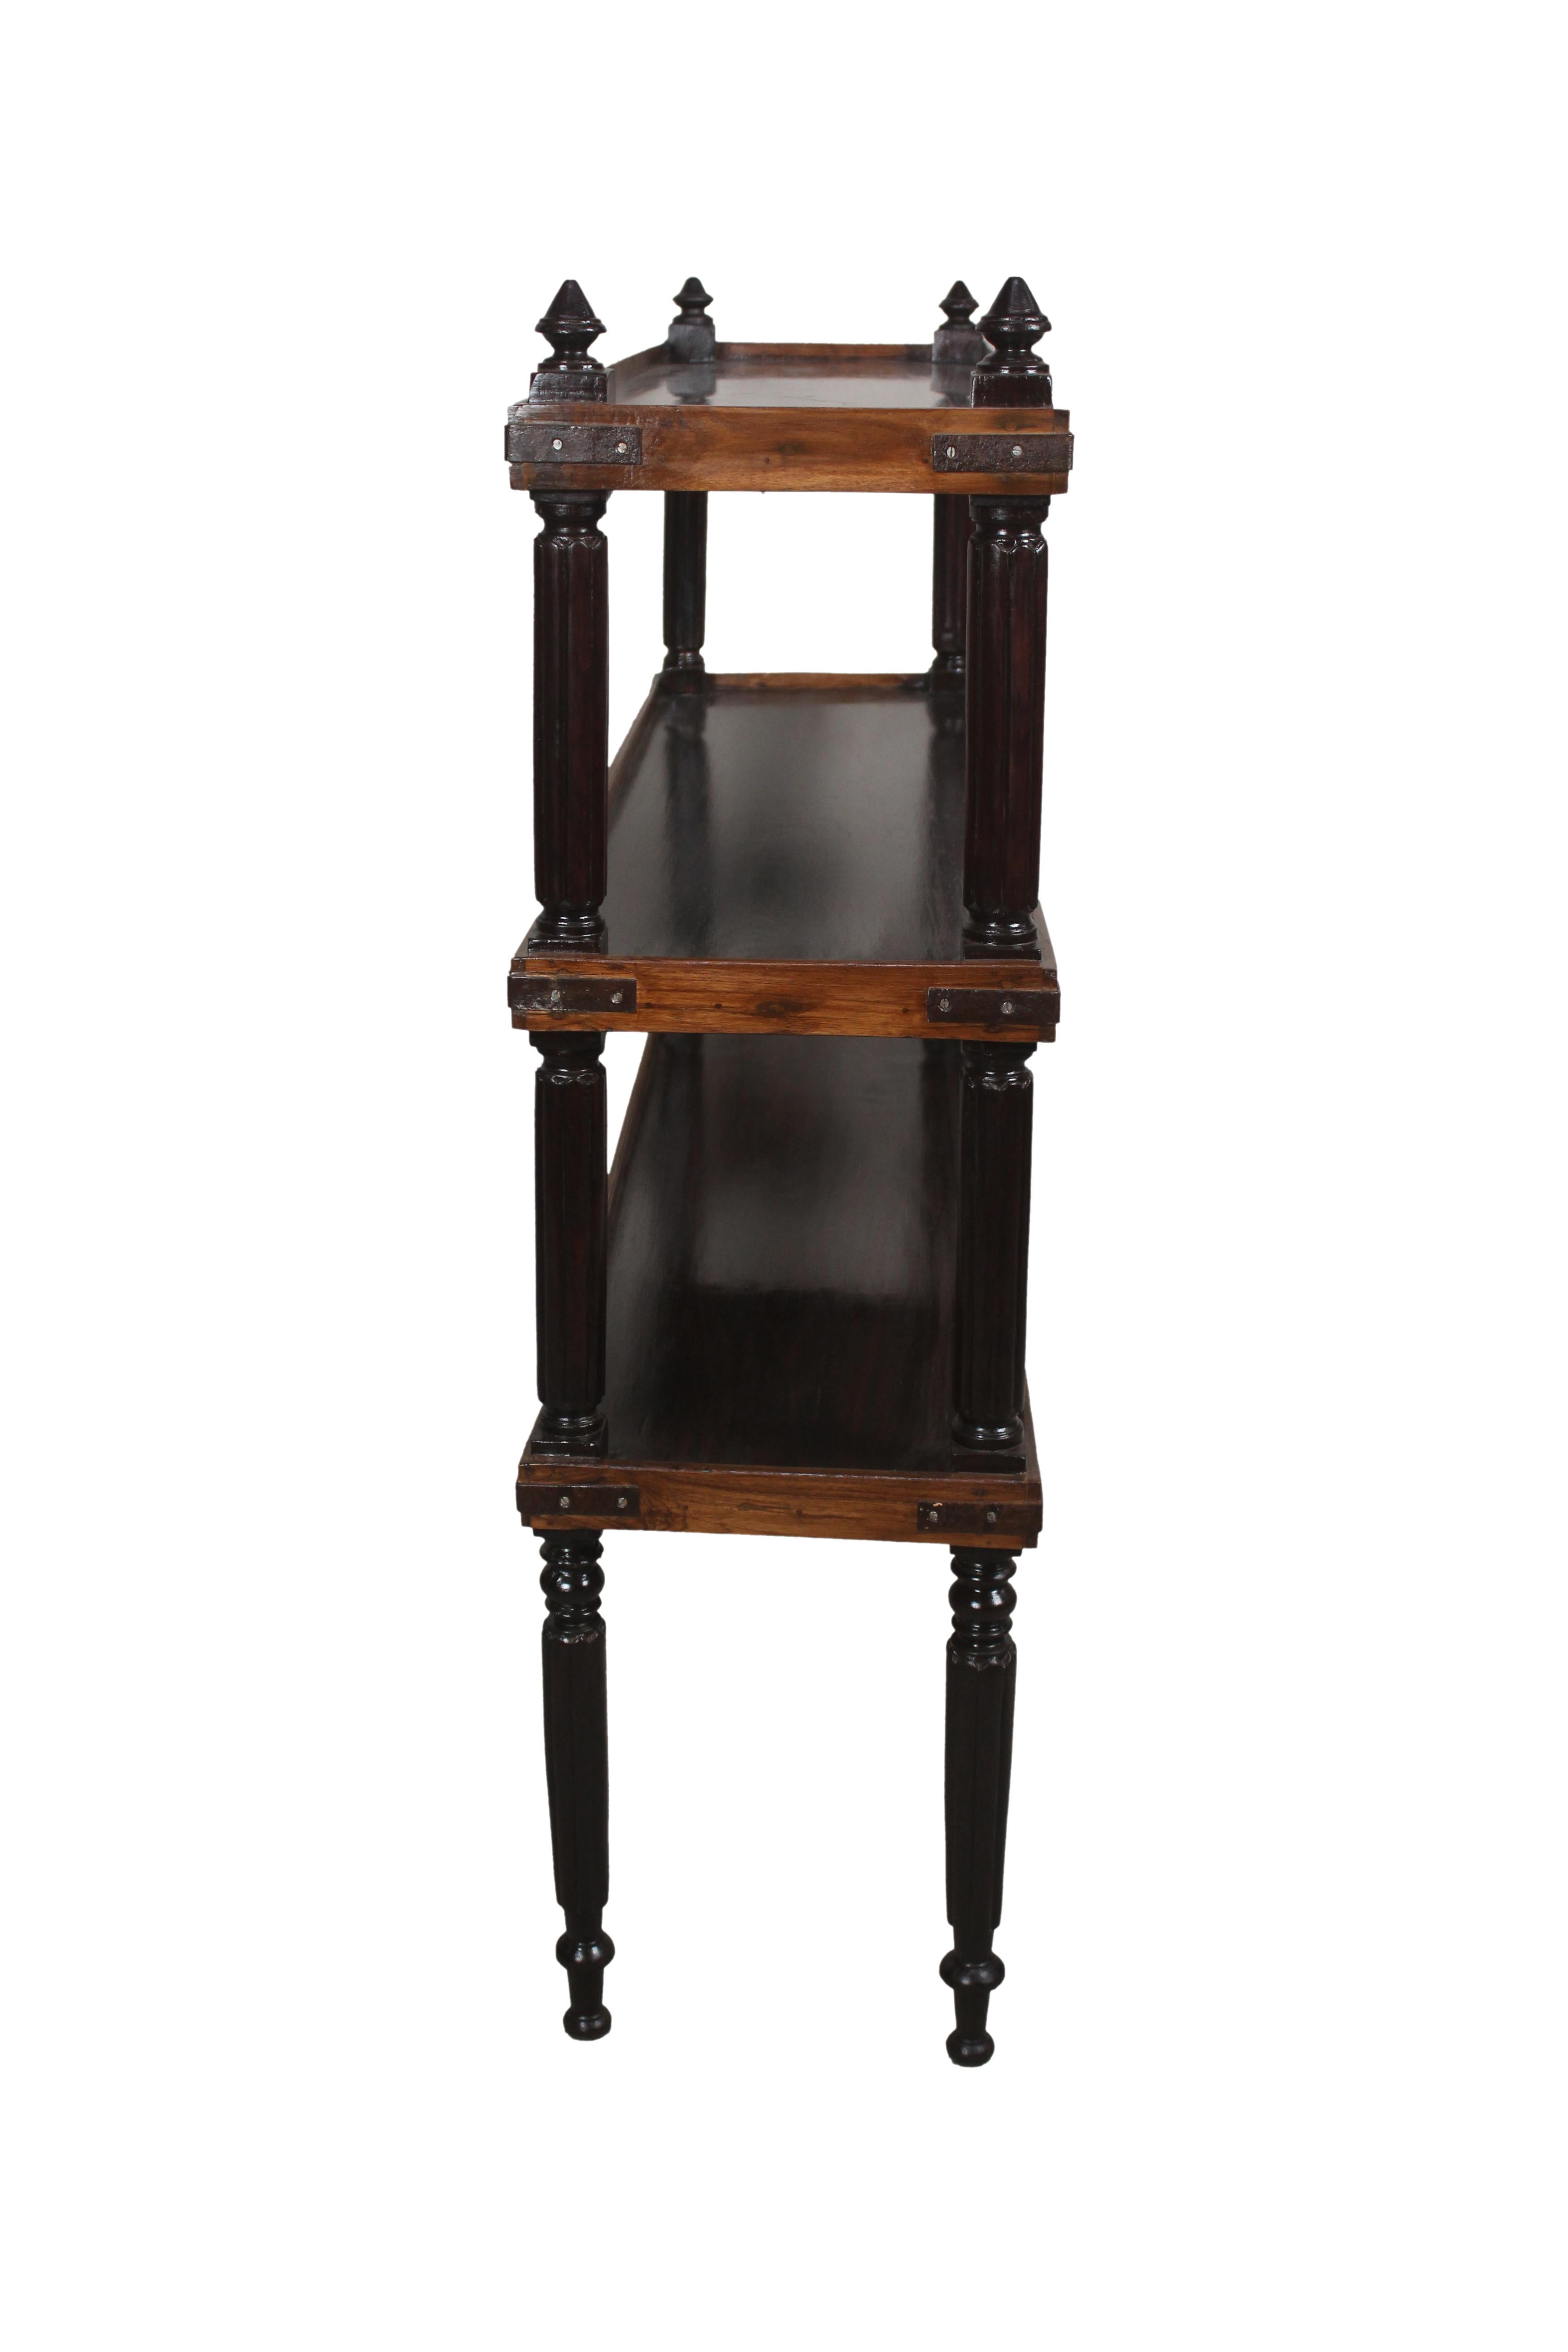 British Colonial Rosewood and Mahogany Three-Tier Shelf Étagère Bookcase, 1940s